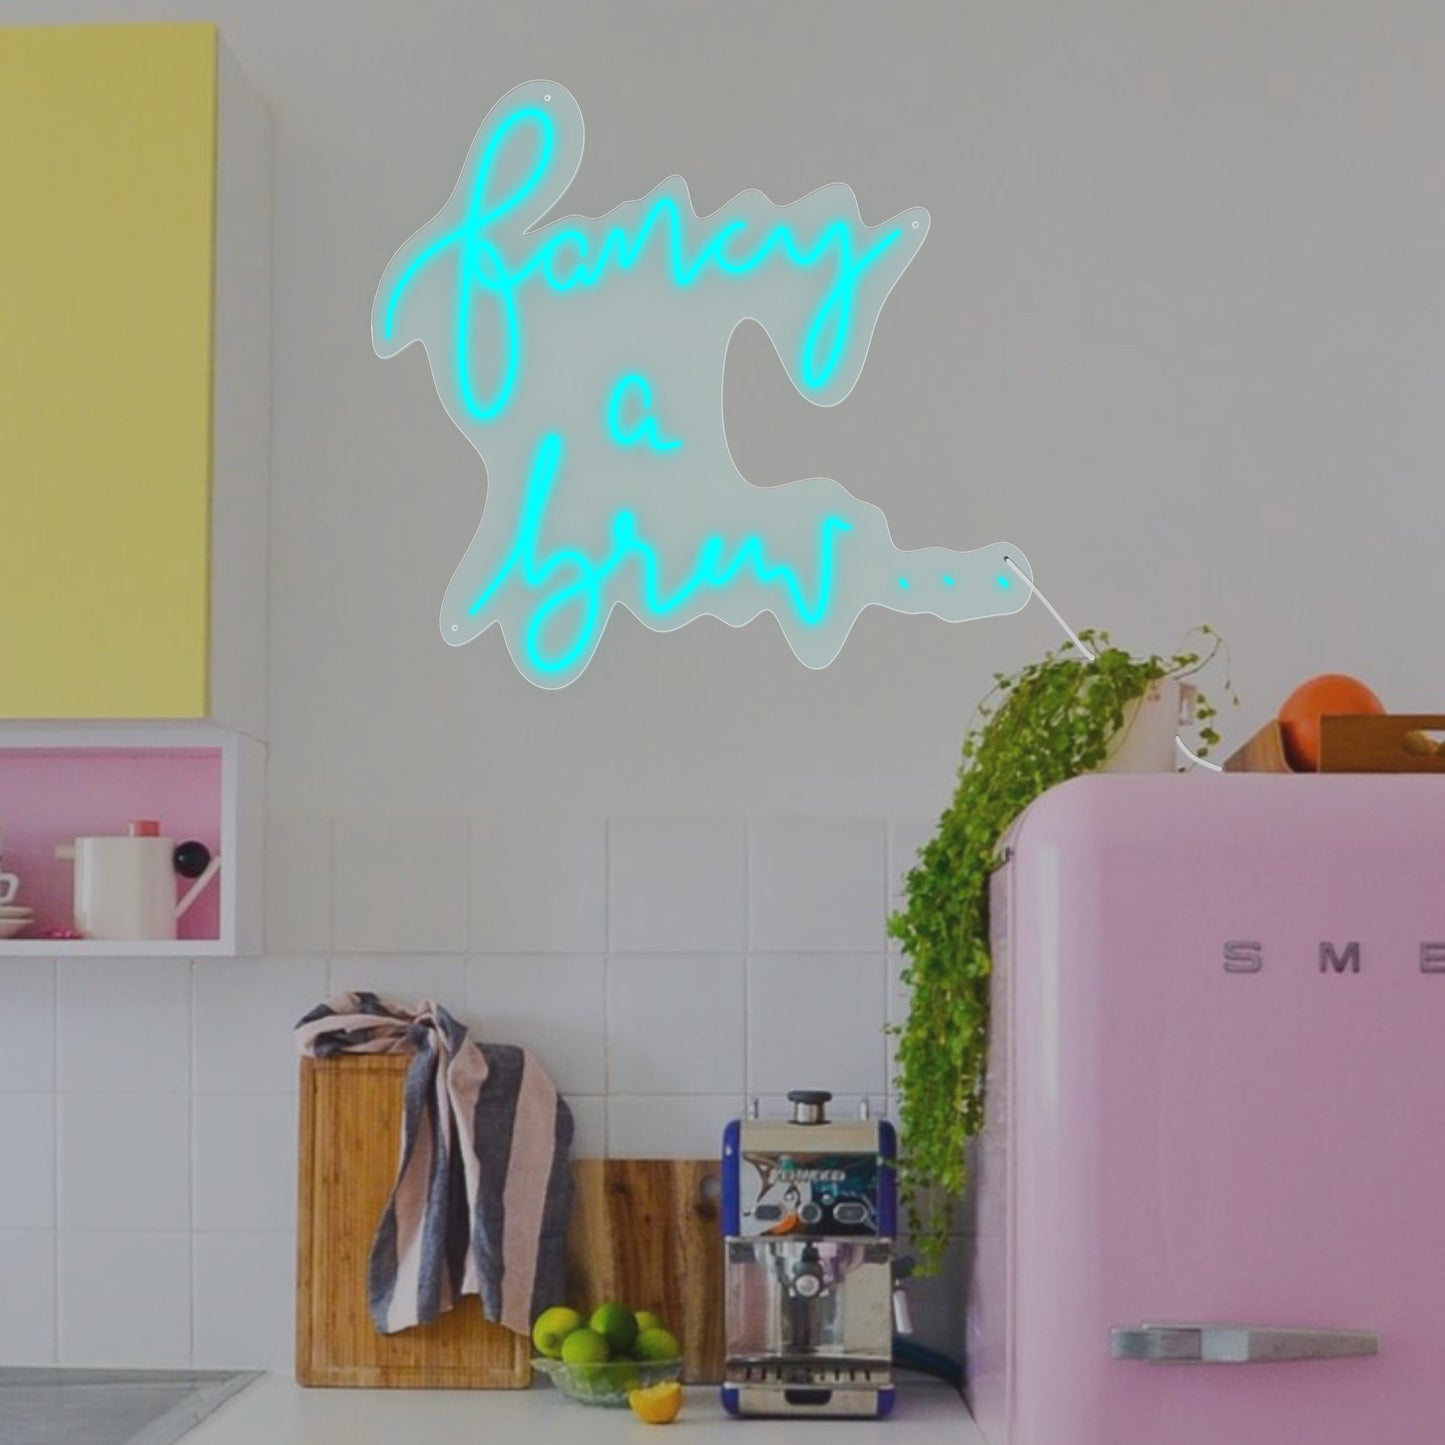 A vibrant 'Fancy a Brew..' Neon Sign, perfect for adding a playful charm to modern kitchens and embracing the kitsch trend